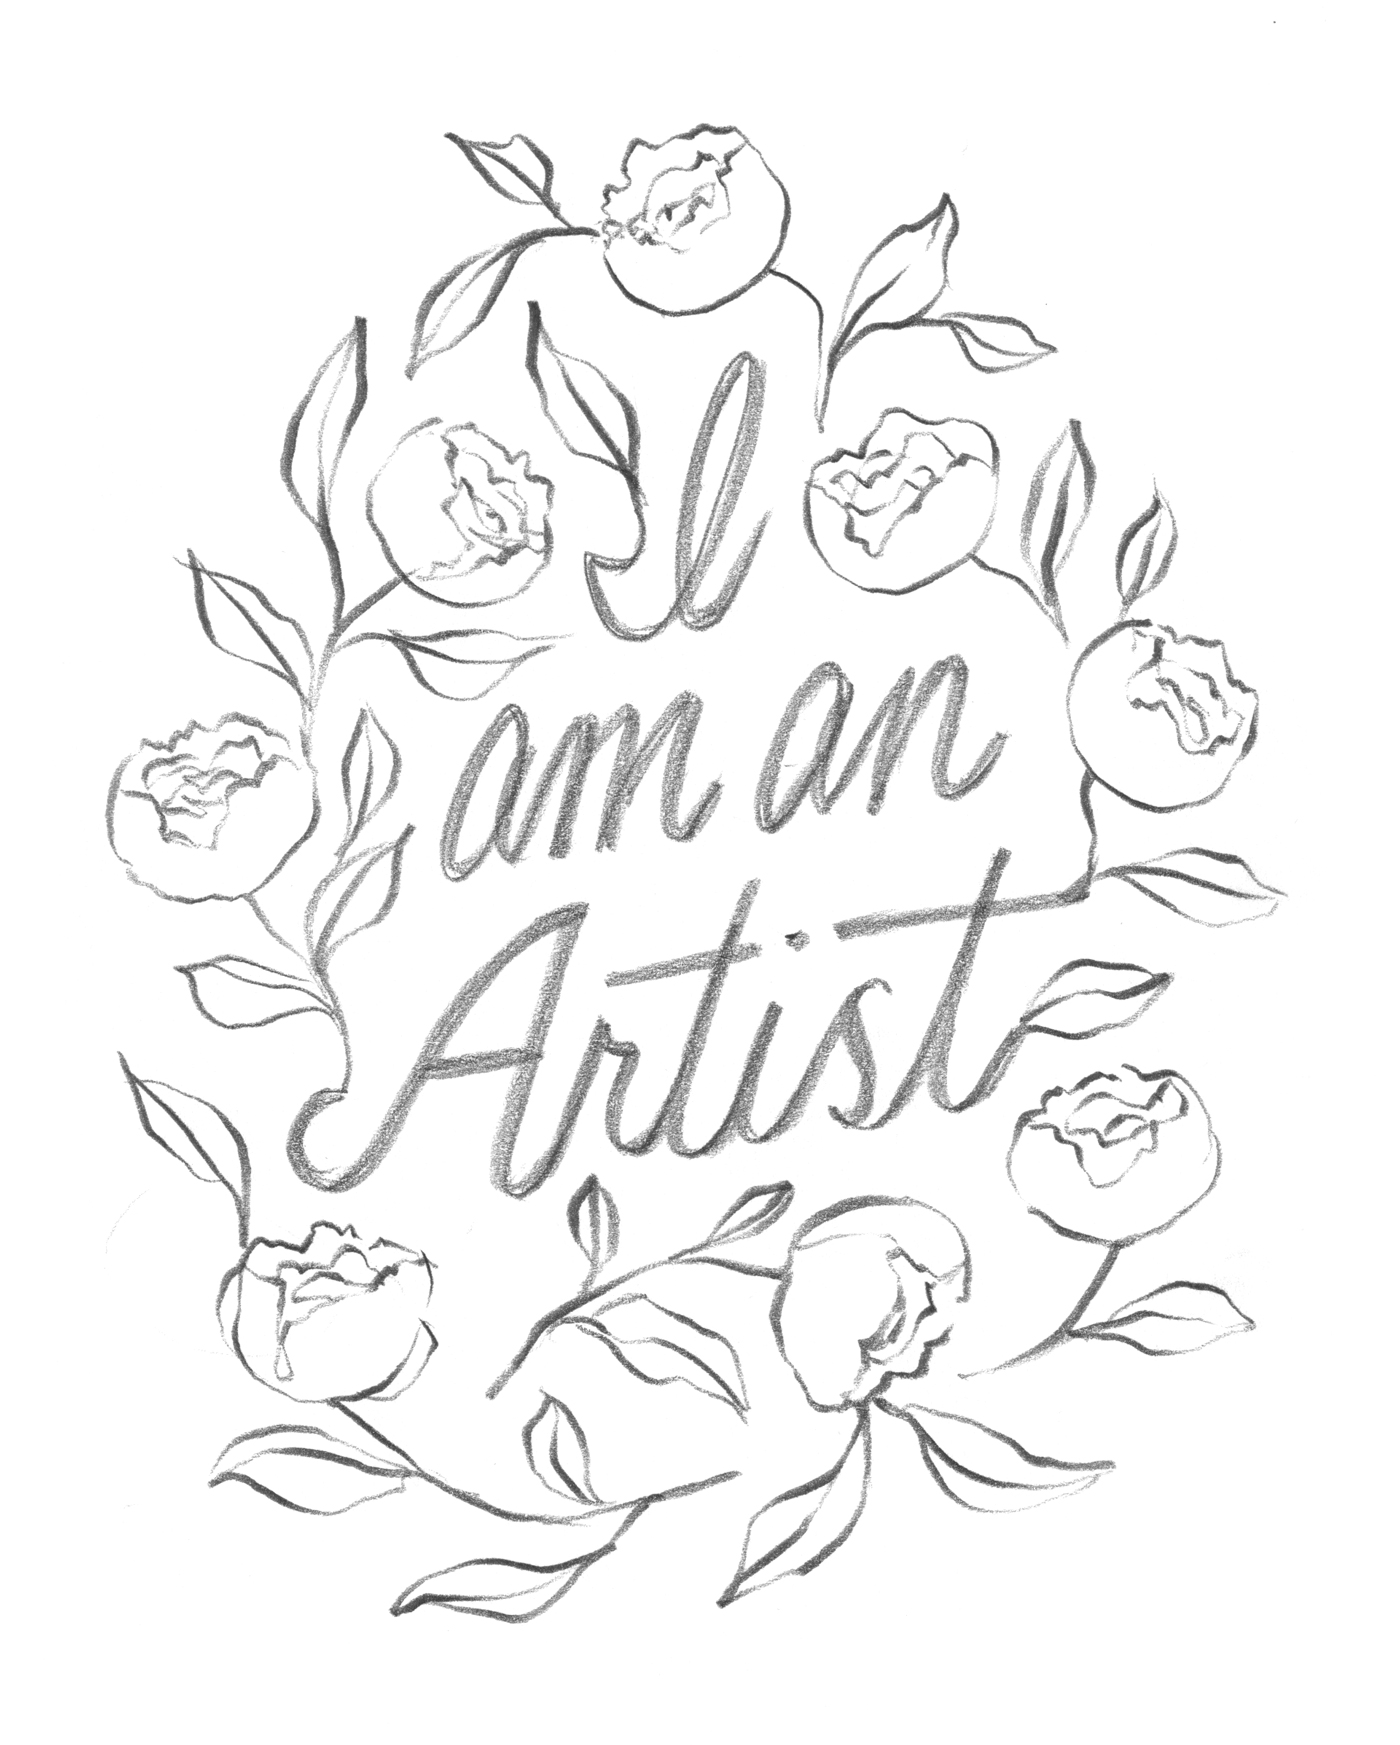 "I Am An Artist." illustrated floral lettering by Laura Dreyer